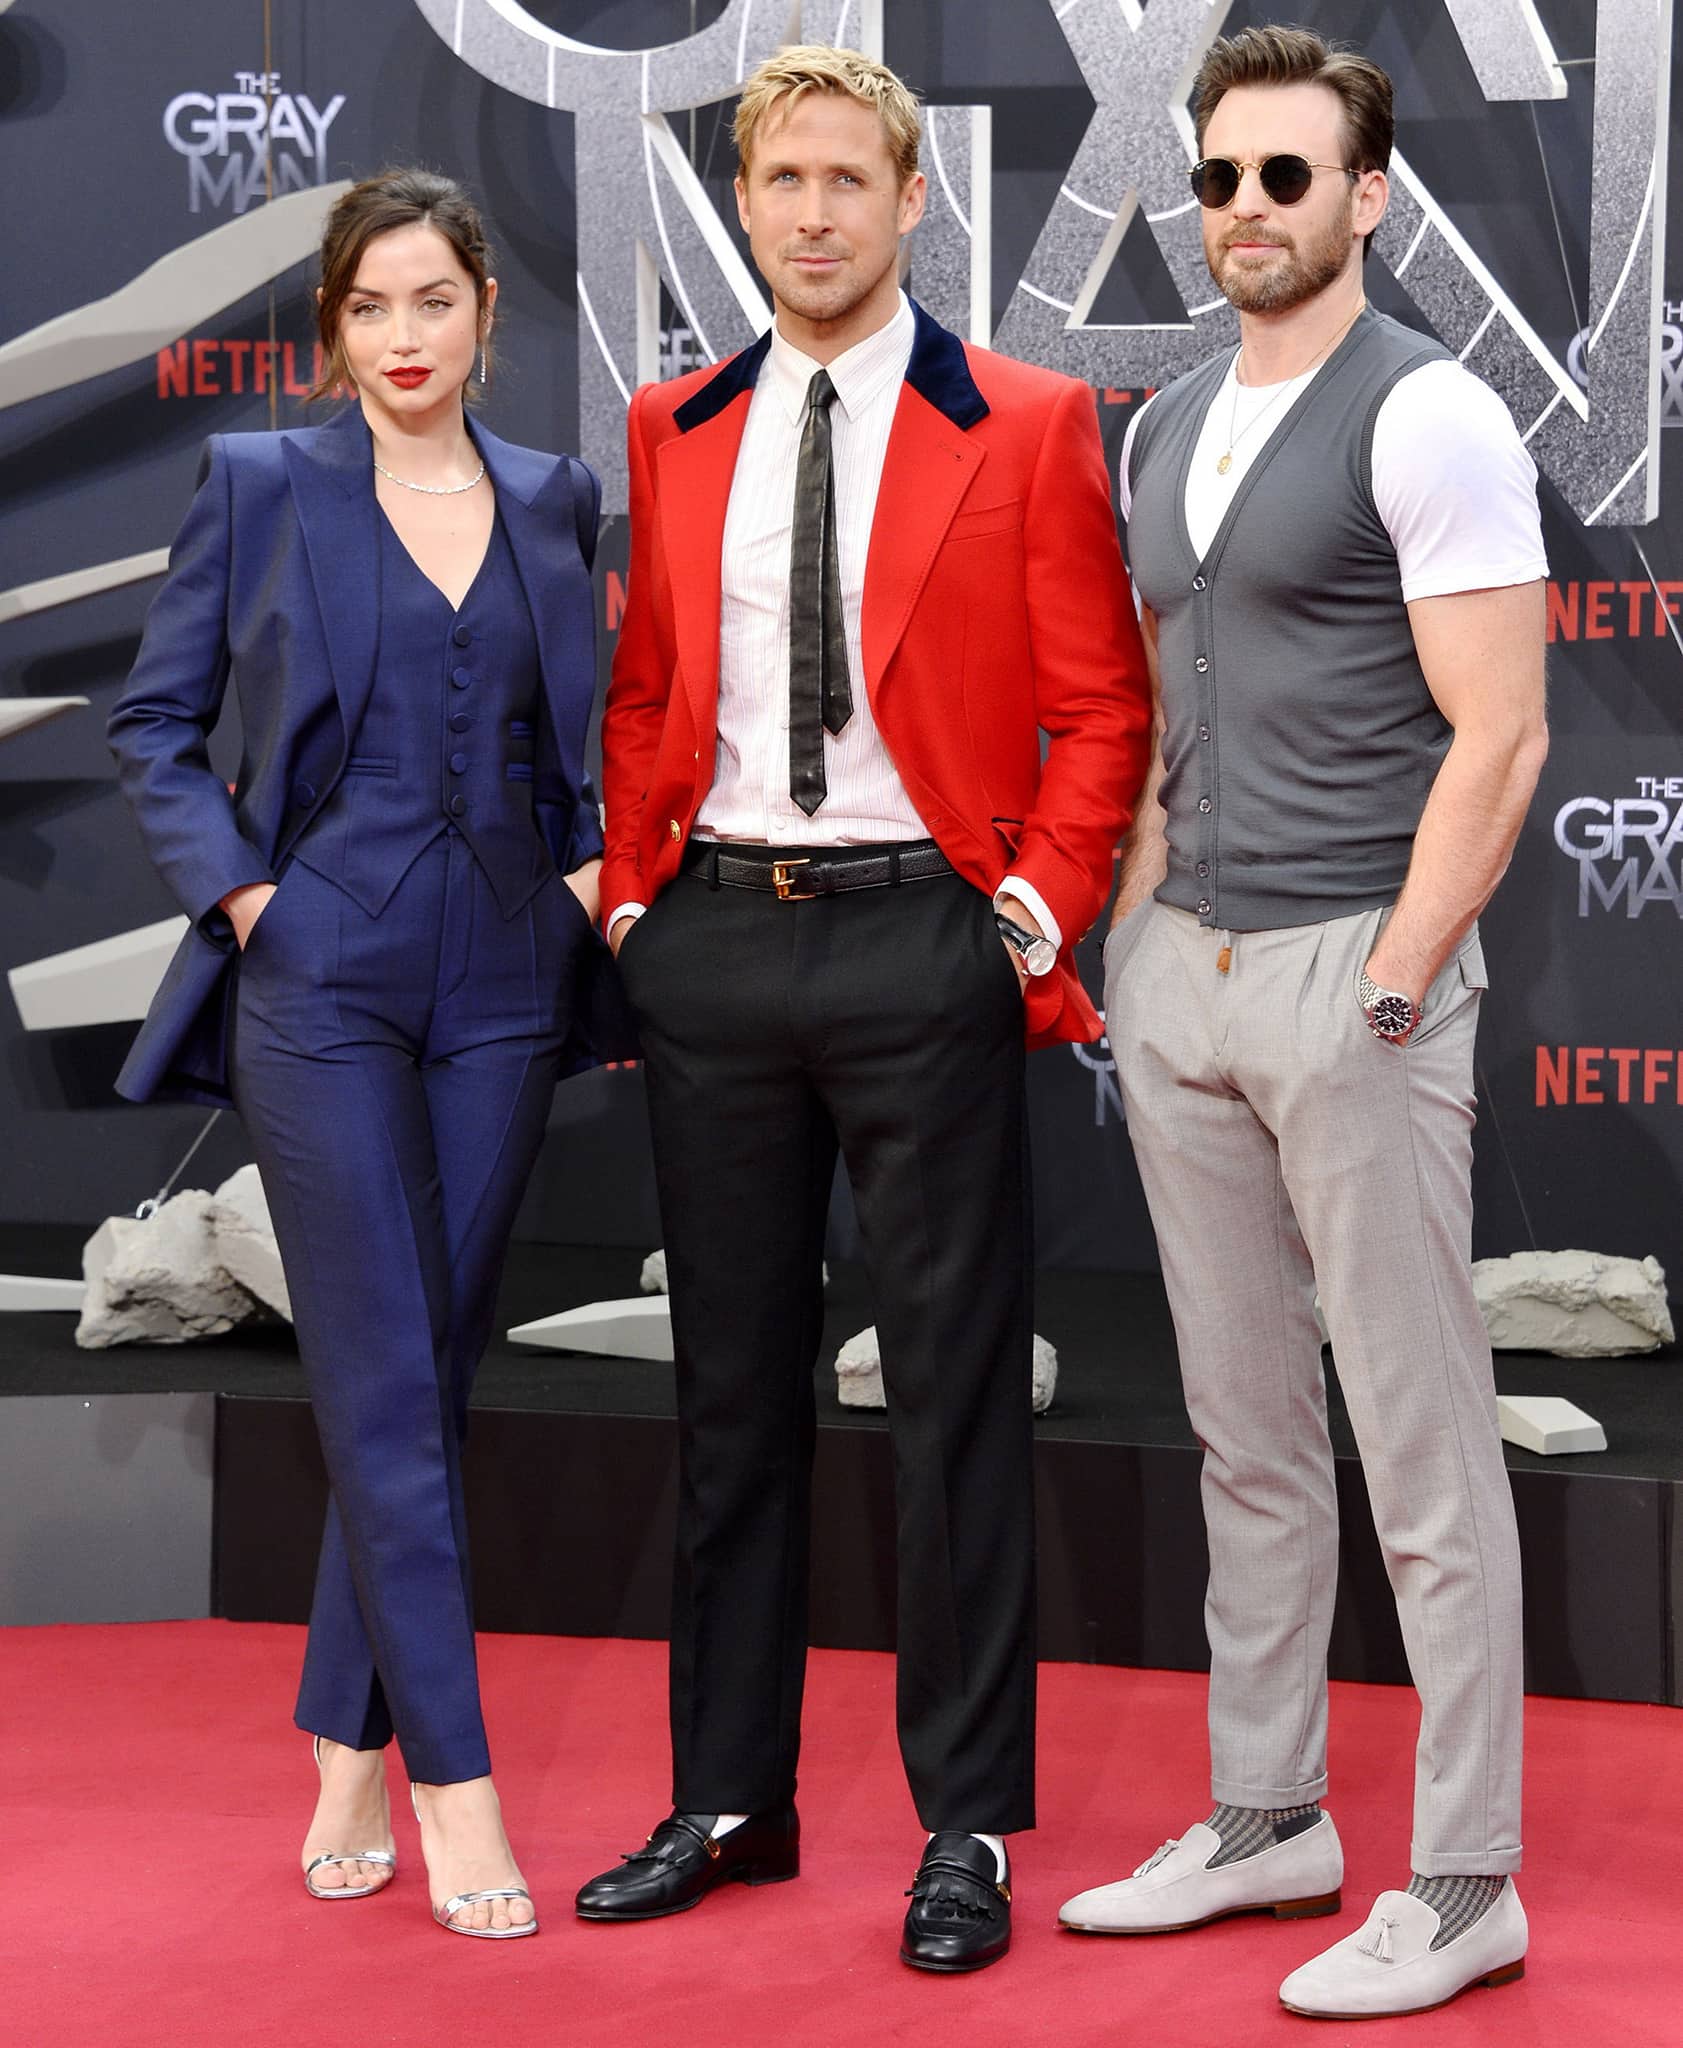 Ryan Gosling stands out in a red blazer in between Ana de Armas and Chris Evans